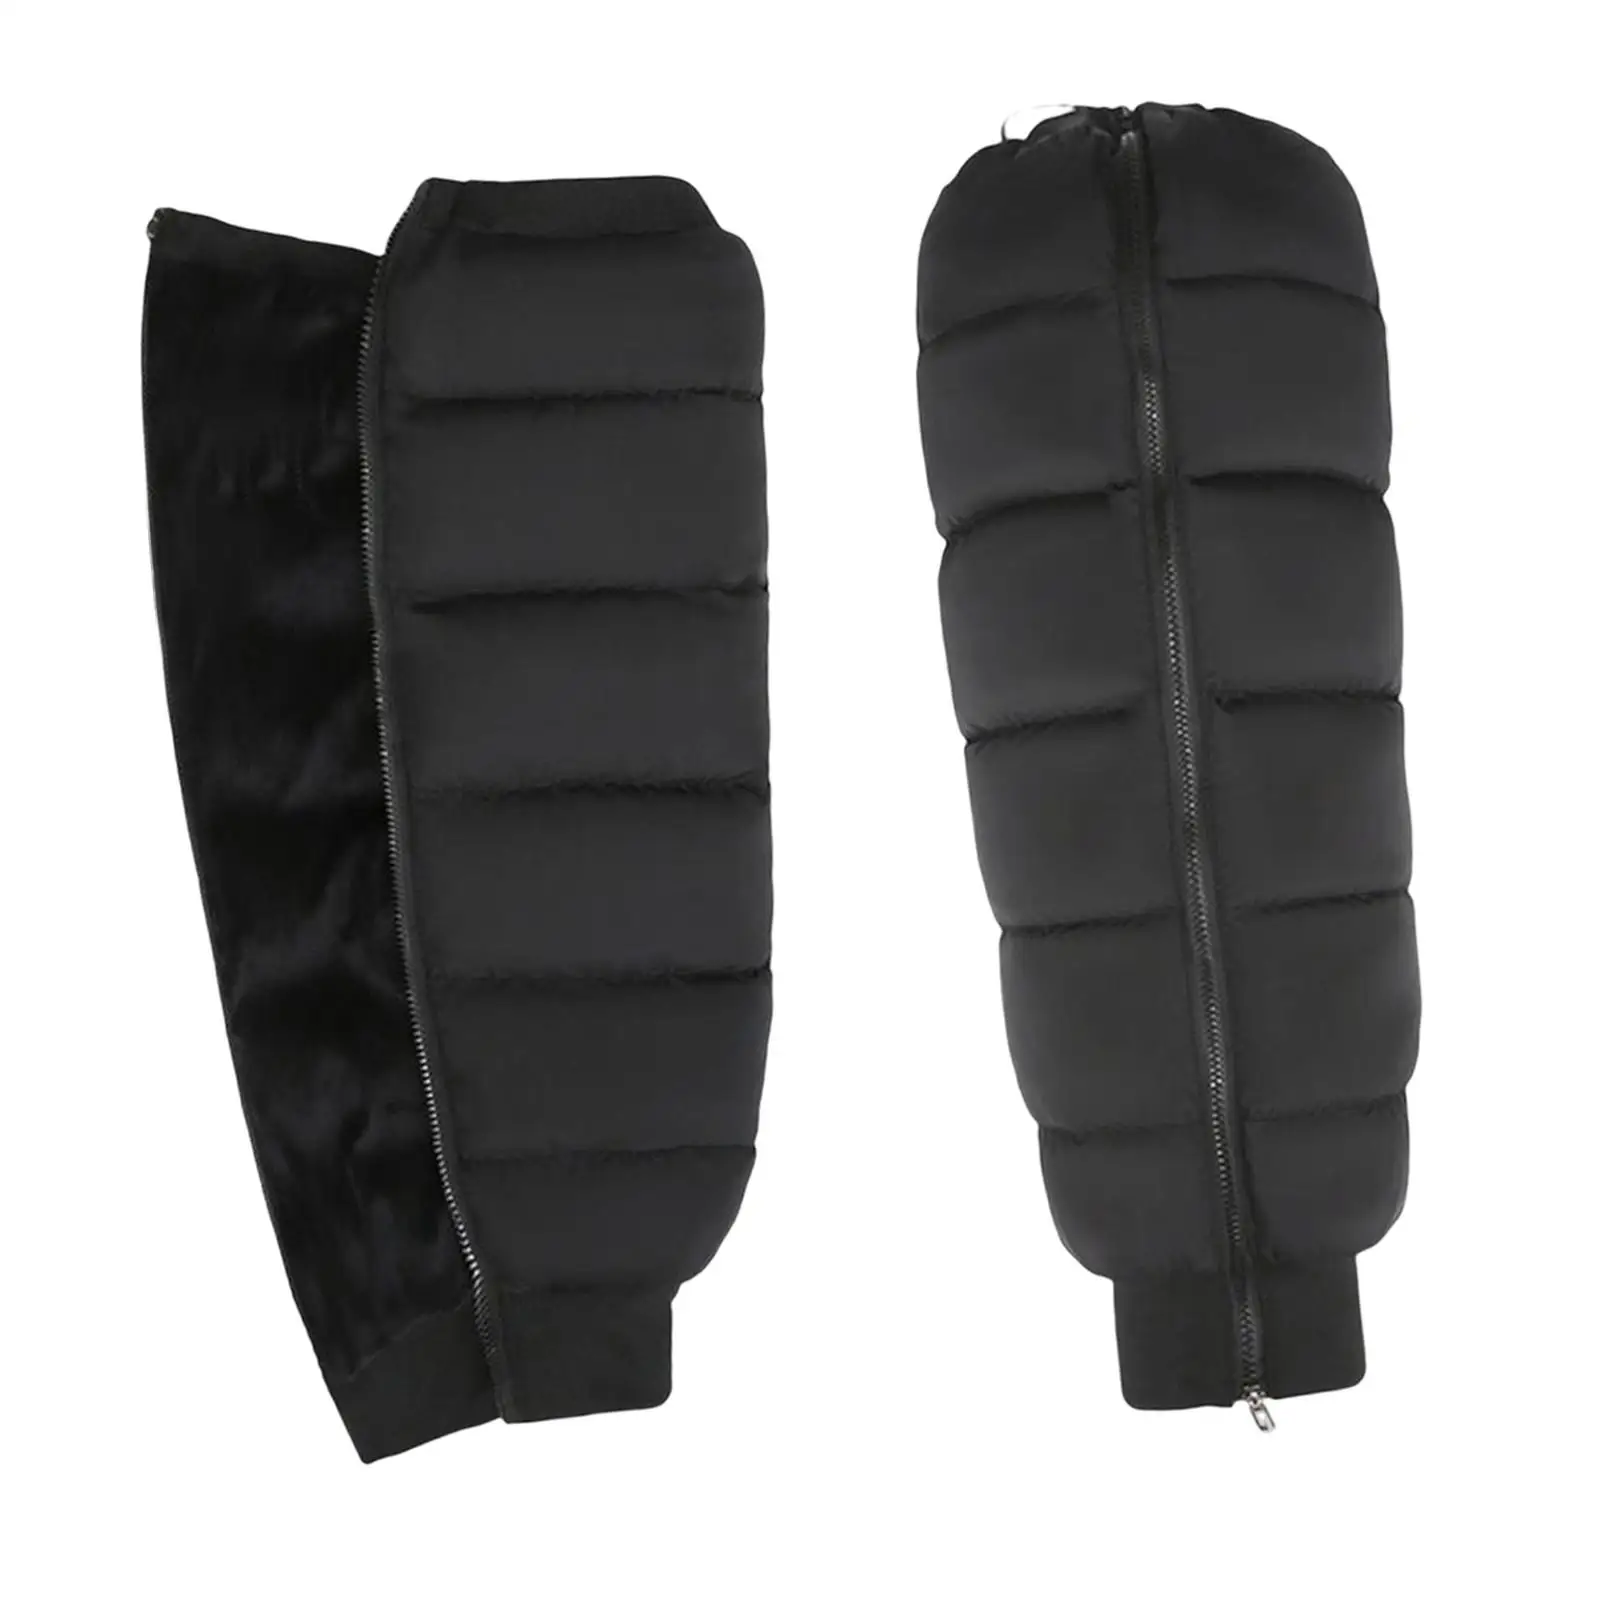 2 pieces winter knee pads protective leggings leg cuffs windproof for